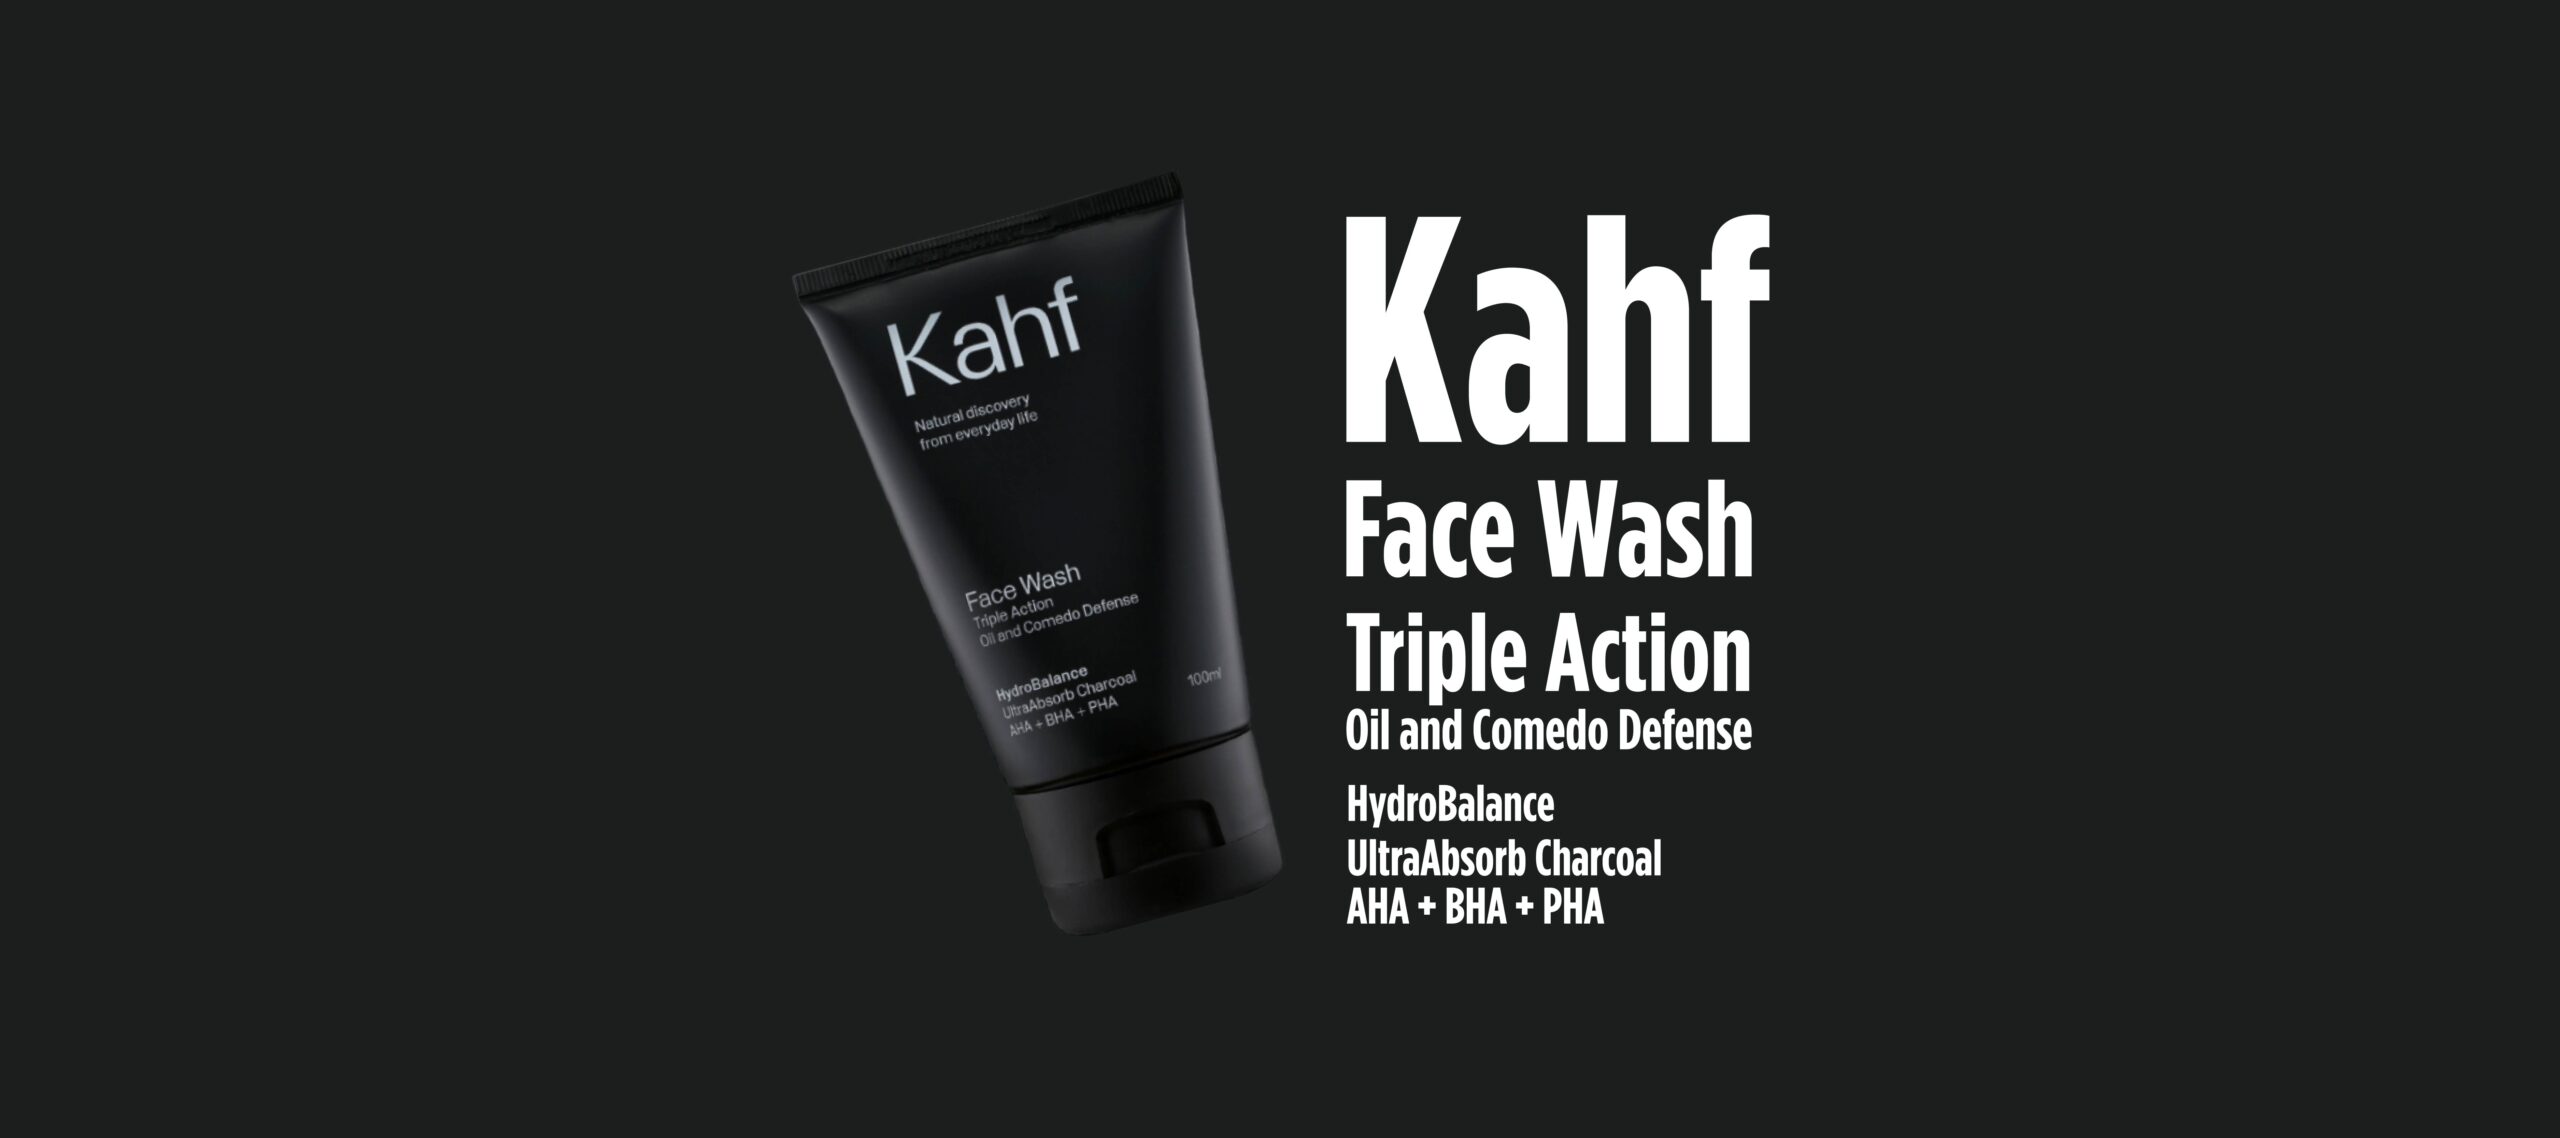 Face Wash Kahf Triple Action Oil and Comedo Defense